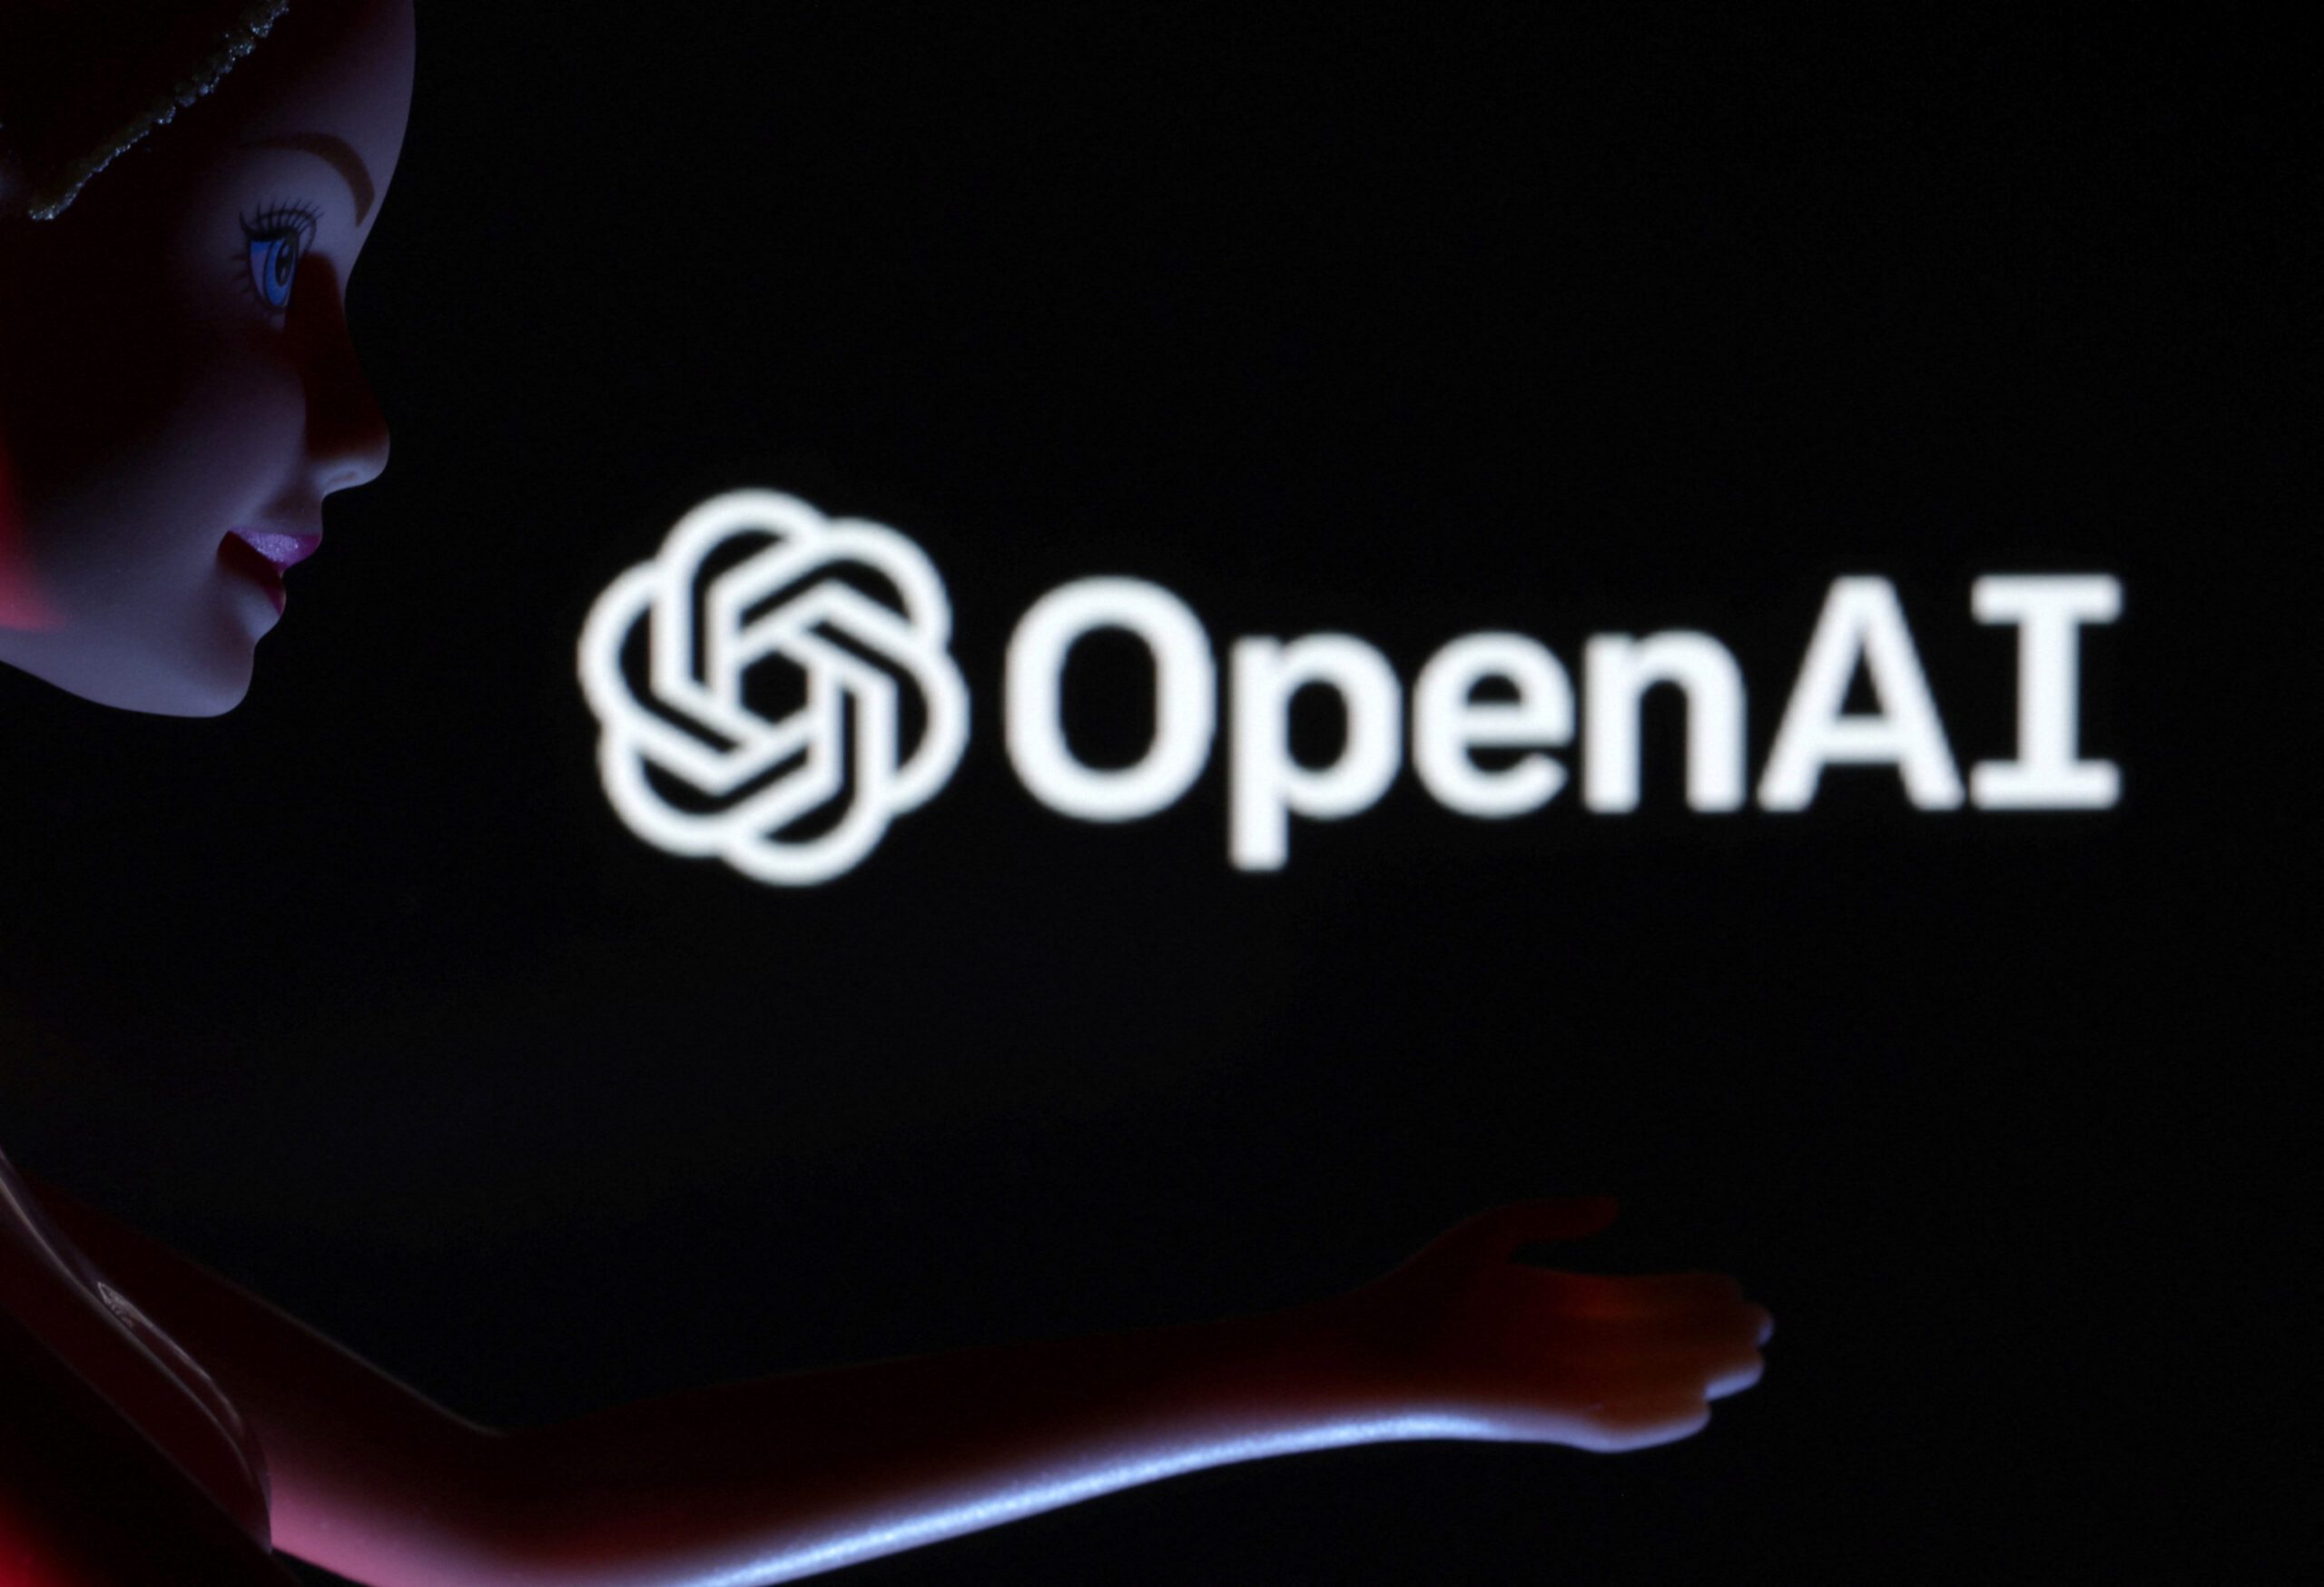 Microsoft, other investors unlikely to get a board seat at OpenAI